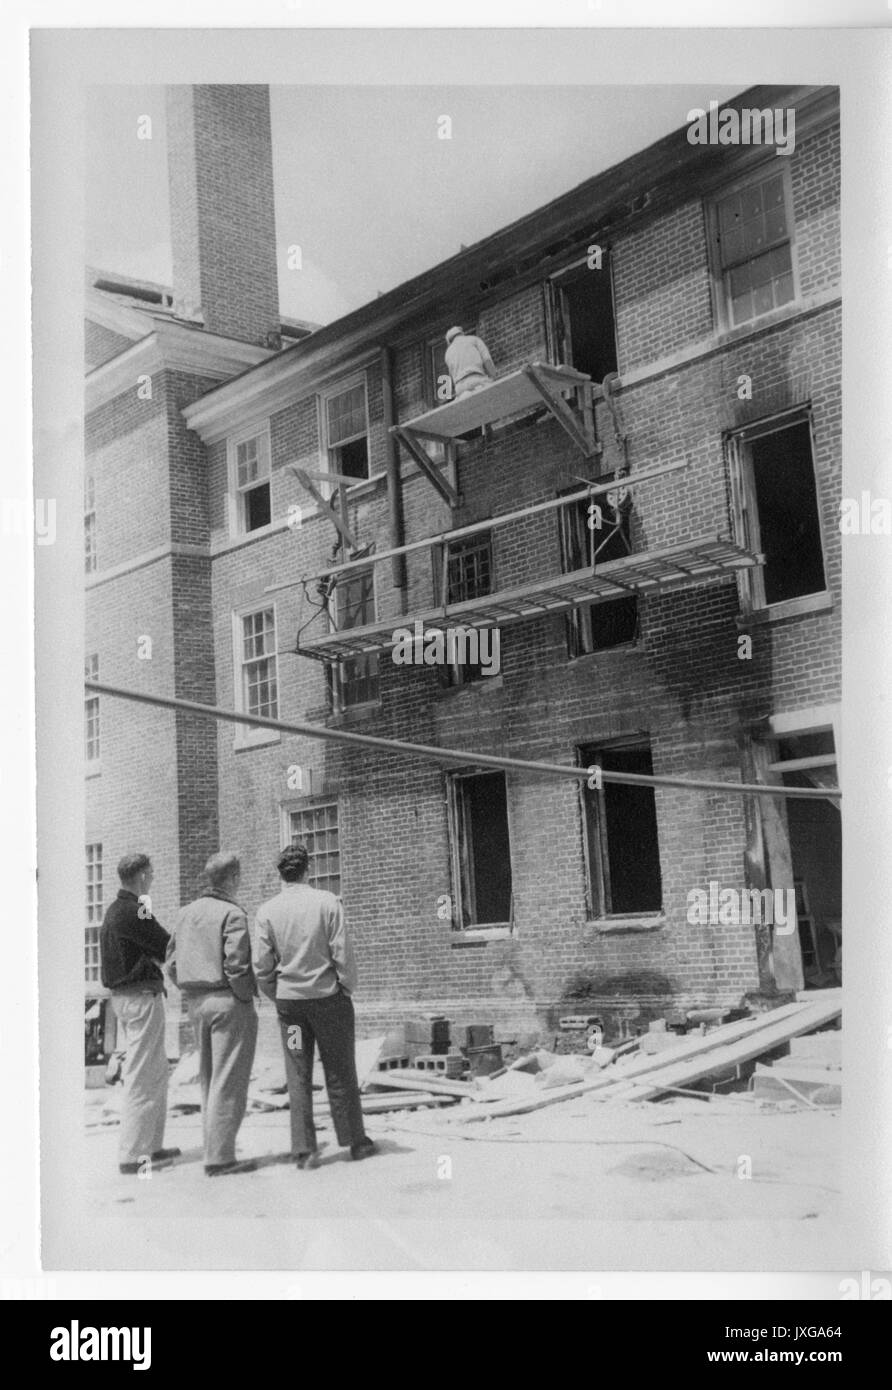 Alumni Memorial Residences, Dormitory Construction of second dormitory, Three students are looking at a man doing construction work on a scaffold, 1954. Stock Photo